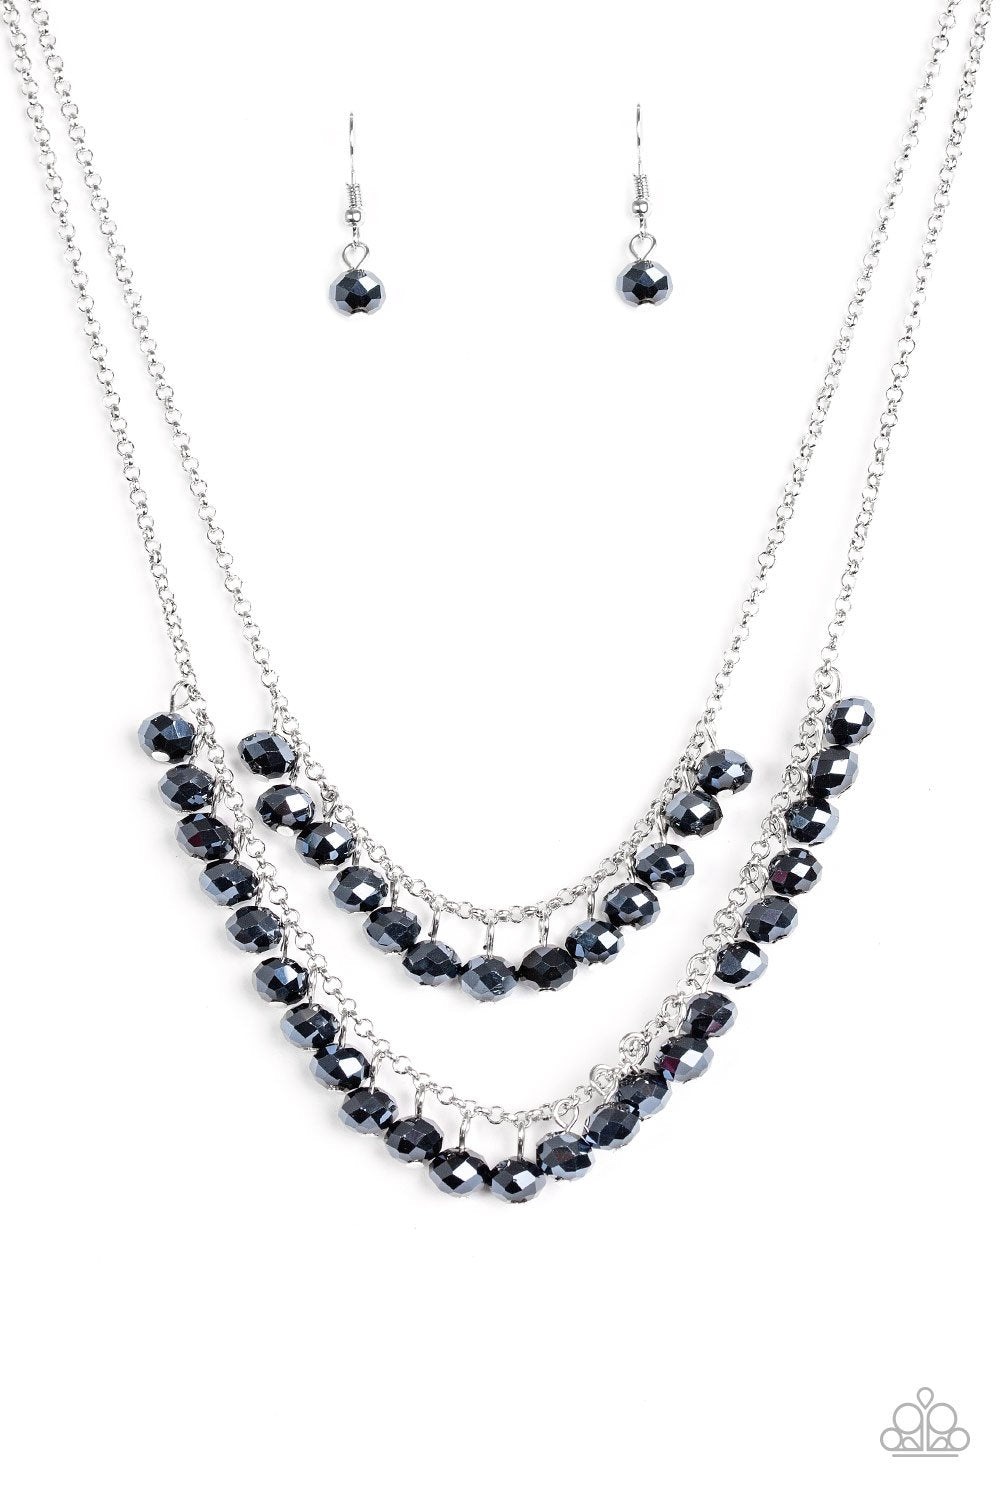 Starlight Sailing Silver and Metallic Blue Bead Necklace - Paparazzi Accessories-CarasShop.com - $5 Jewelry by Cara Jewels